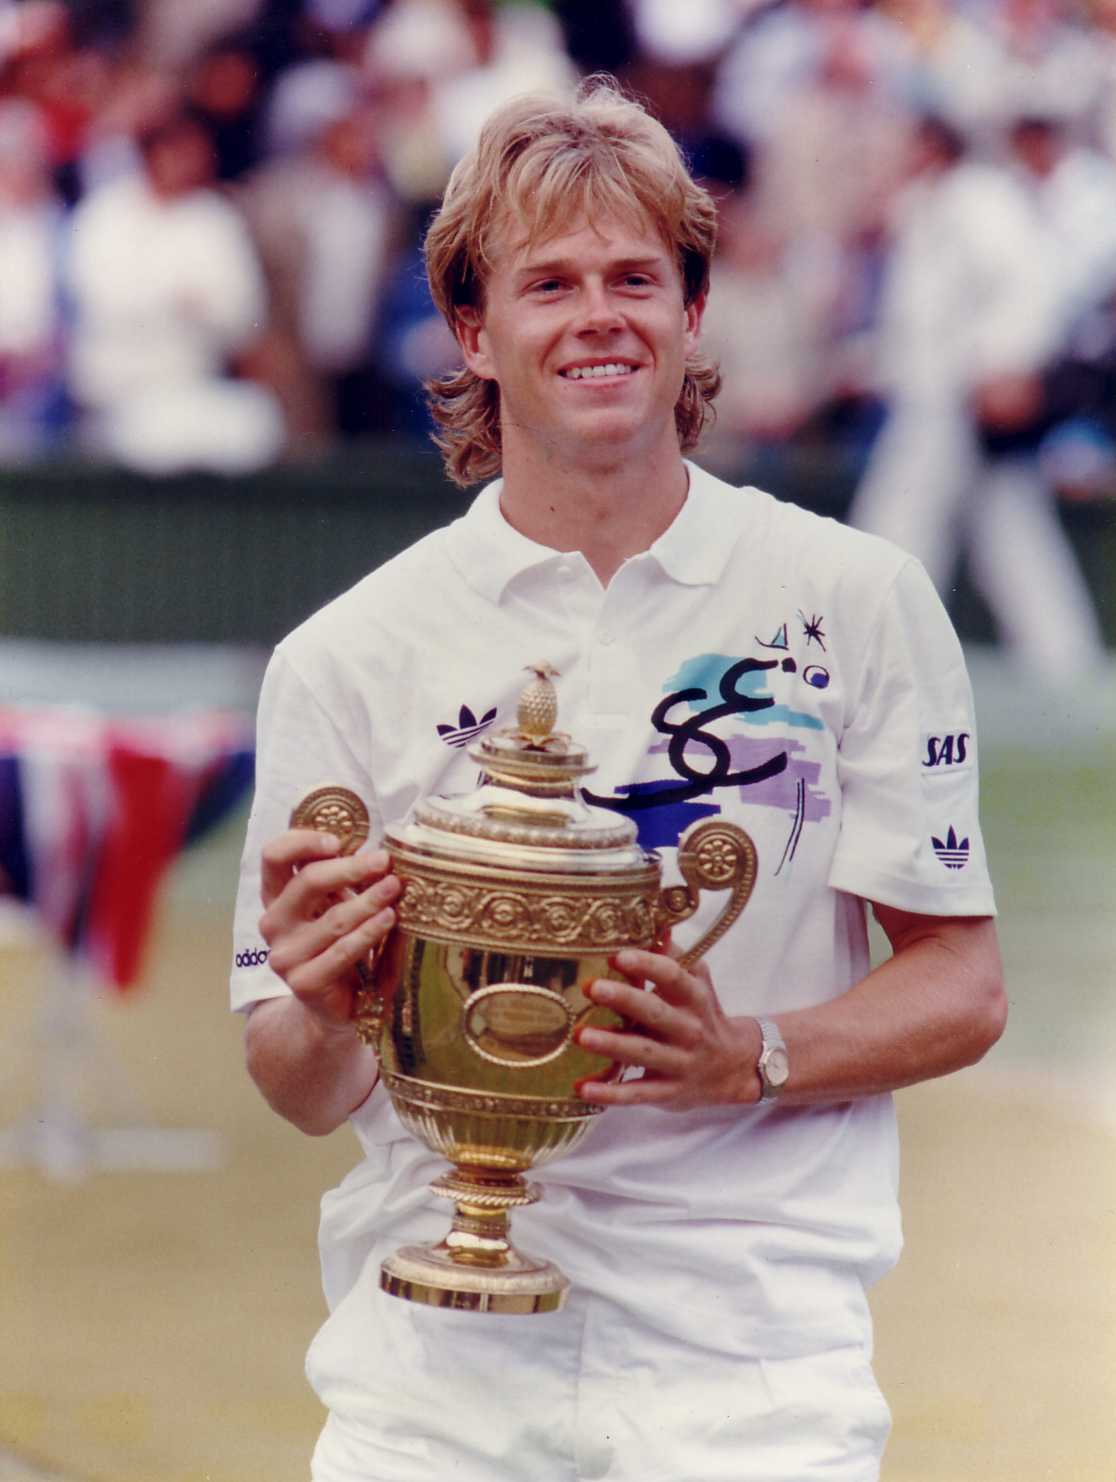 On this day in 1992 Stefan Edberg beats Michael Chang in what is believed to be the longest match in US Open history (5hr 26min)